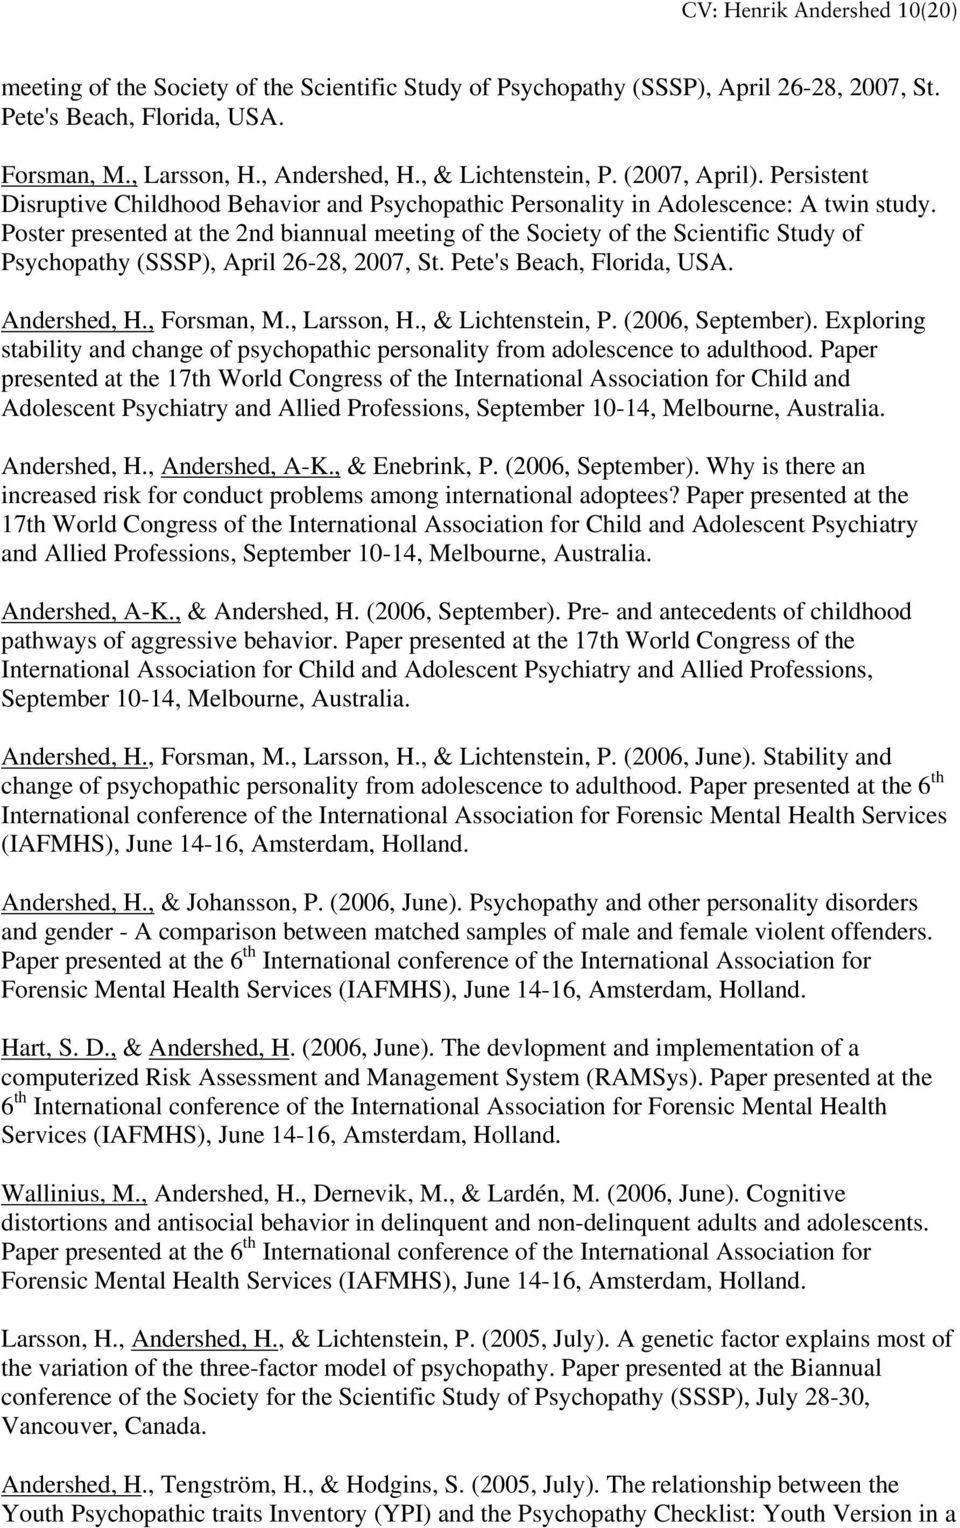 Poster presented at the 2nd biannual meeting of the Society of the Scientific Study of Psychopathy (SSSP), April 26-28, 2007, St. Pete's Beach, Florida, USA. Andershed, H., Forsman, M., Larsson, H.